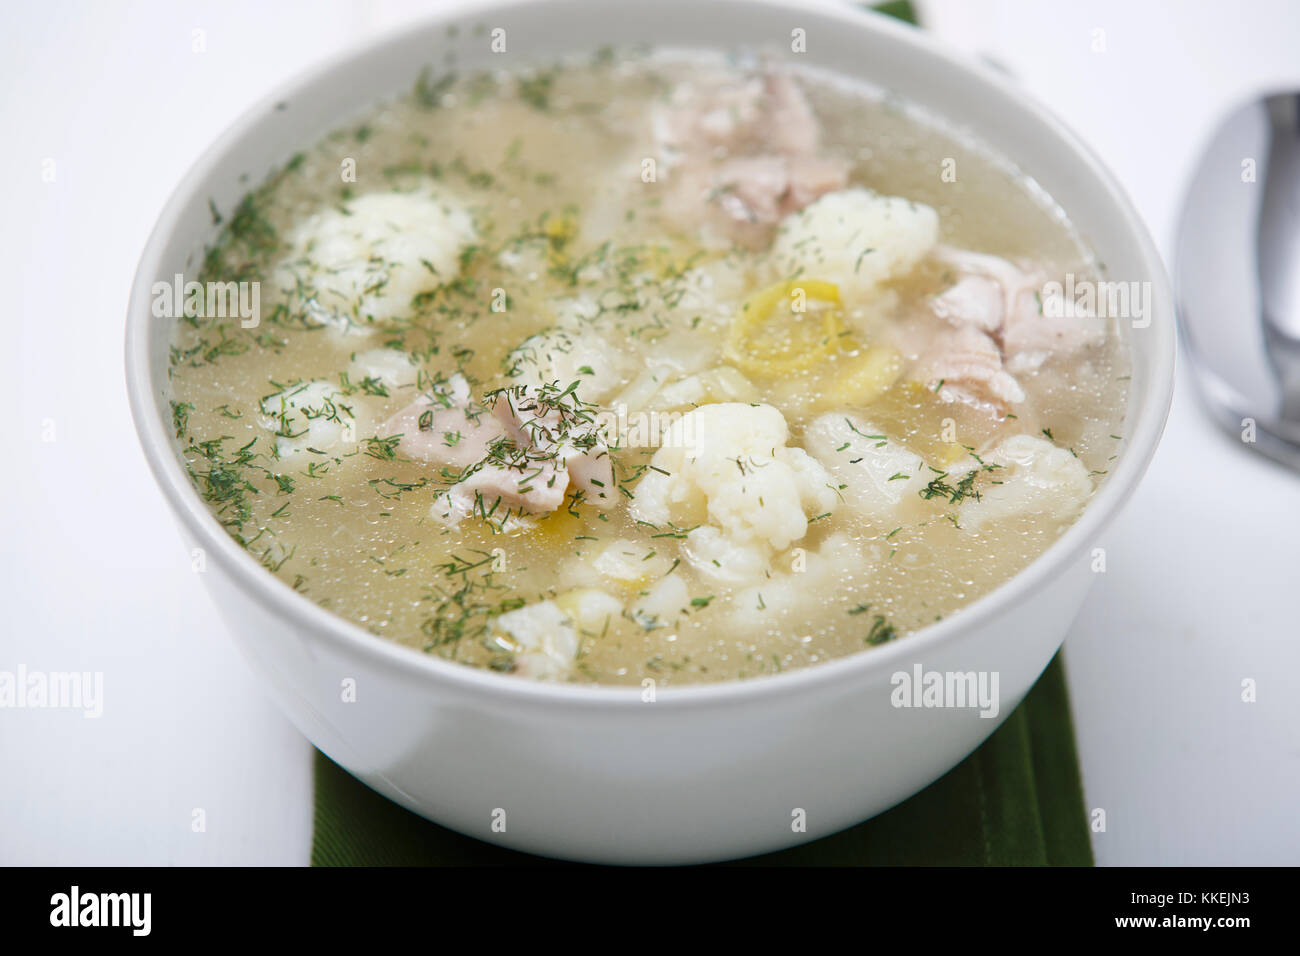 Soup with leek, cauliflower and chicken. Stock Photo